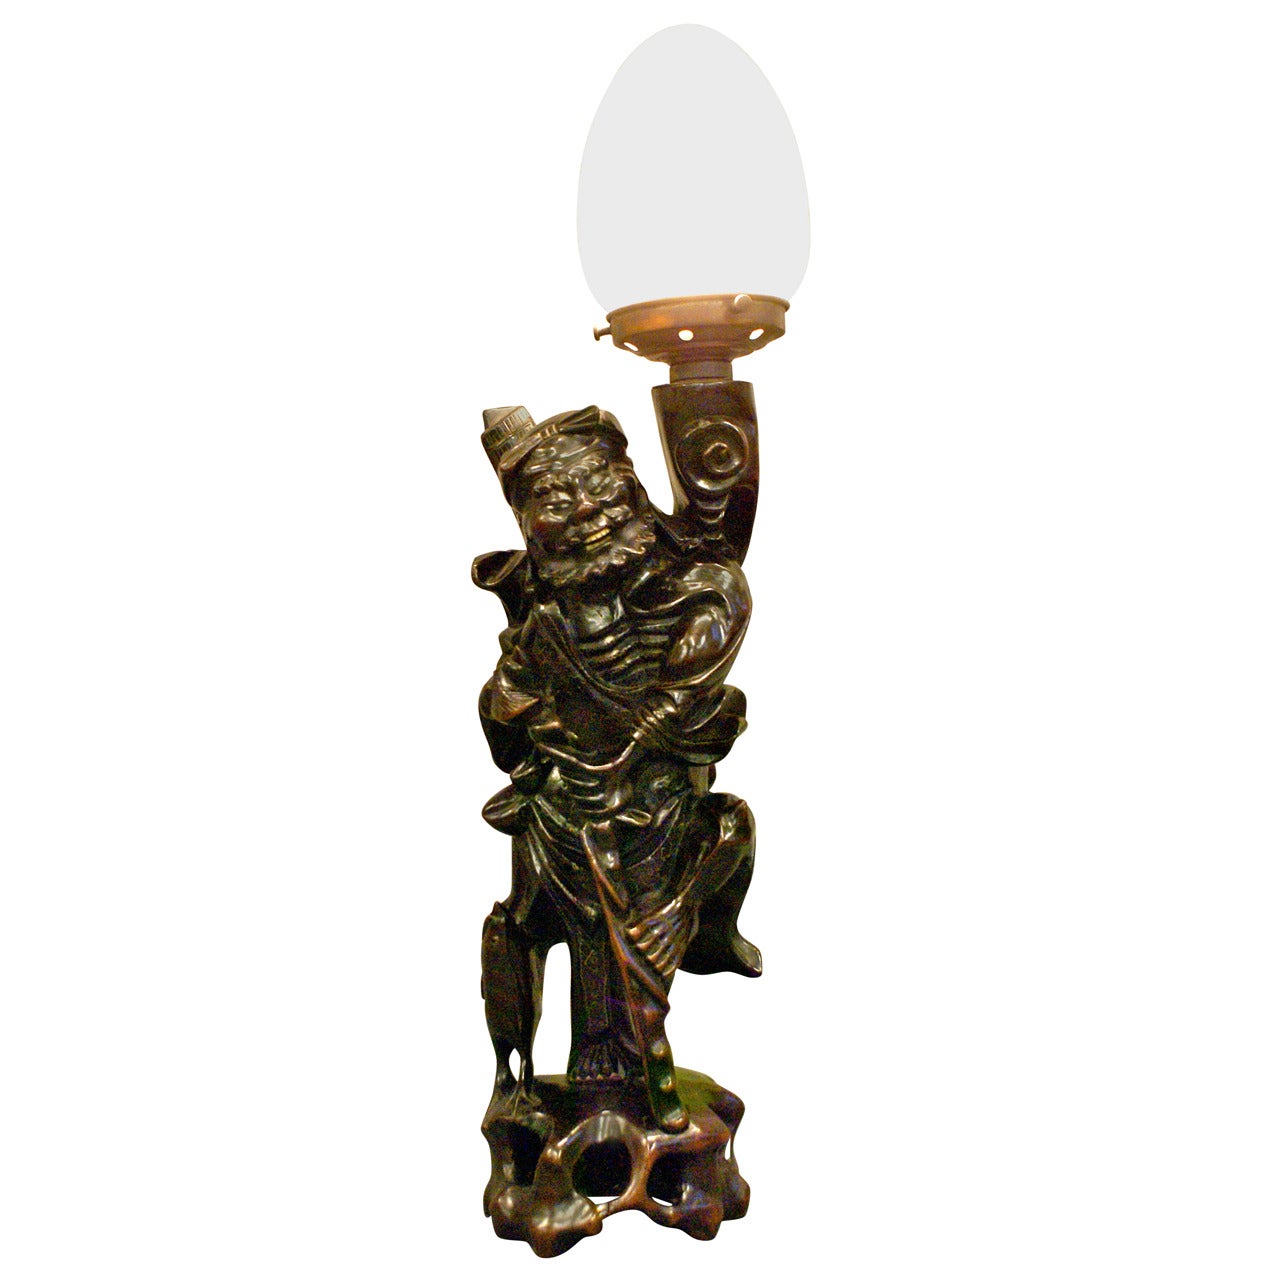 A 19th century Japanese carved wooden figure/lamp For Sale